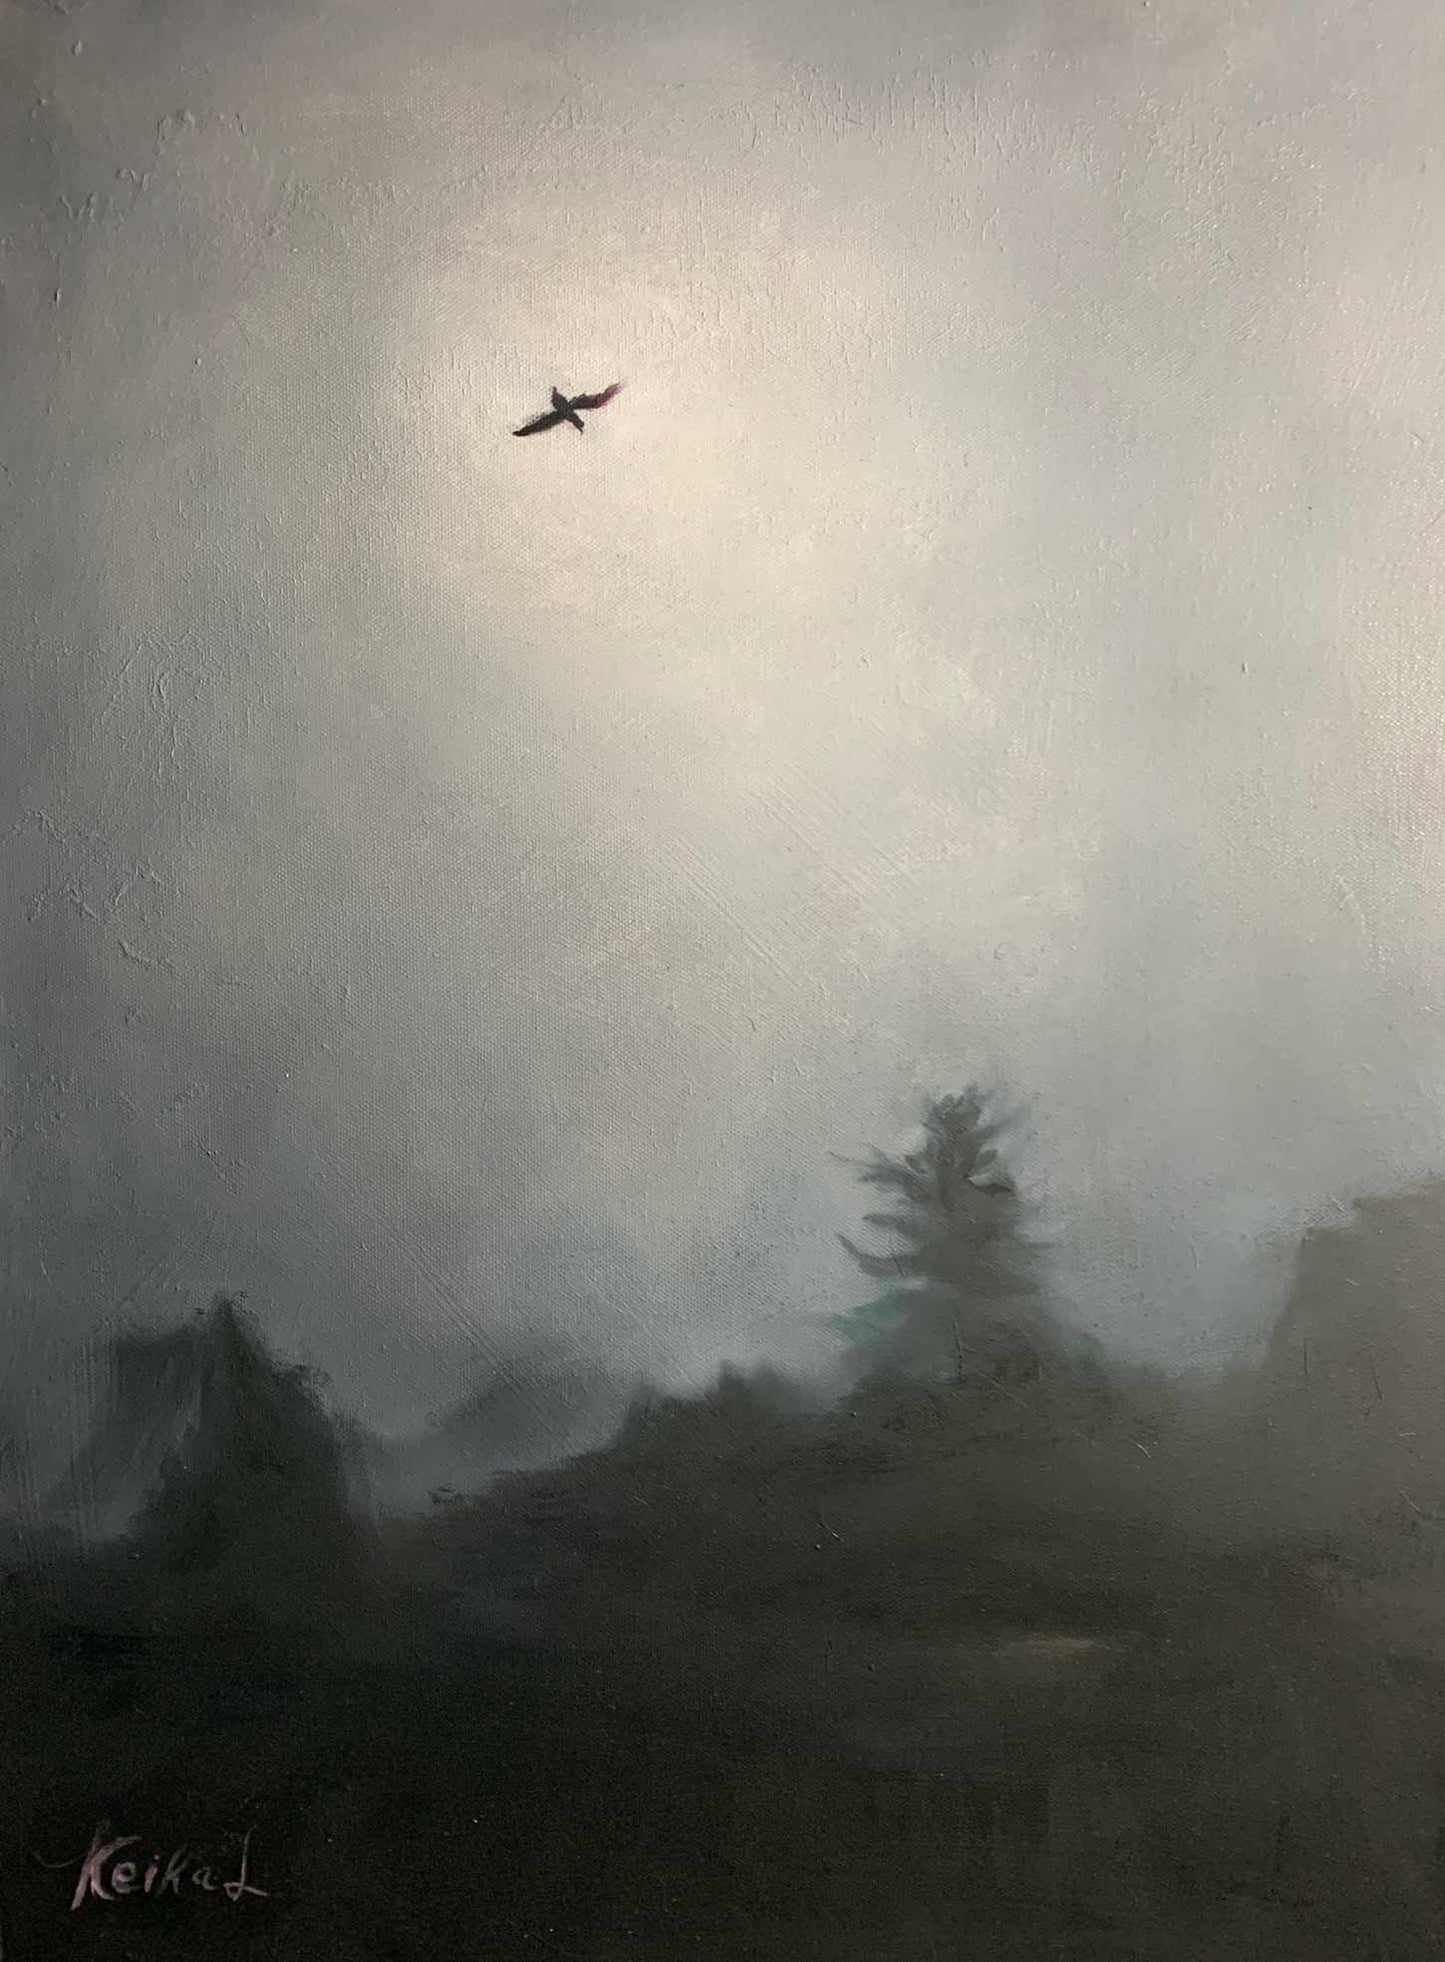 Fly High The Eagle - Oil Painting - 24"x18"